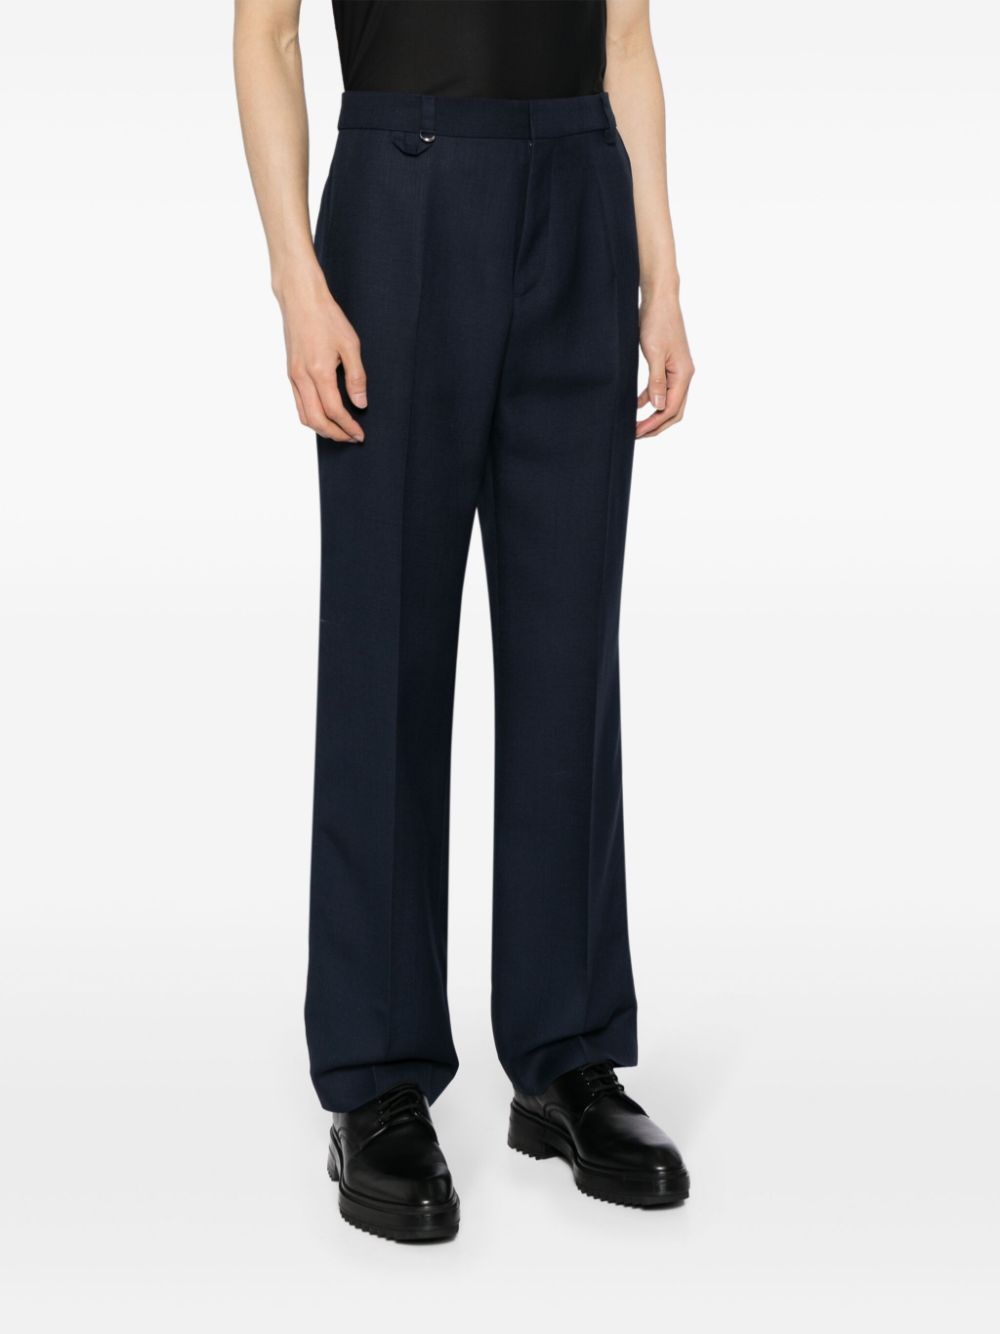 'Melo' trousers